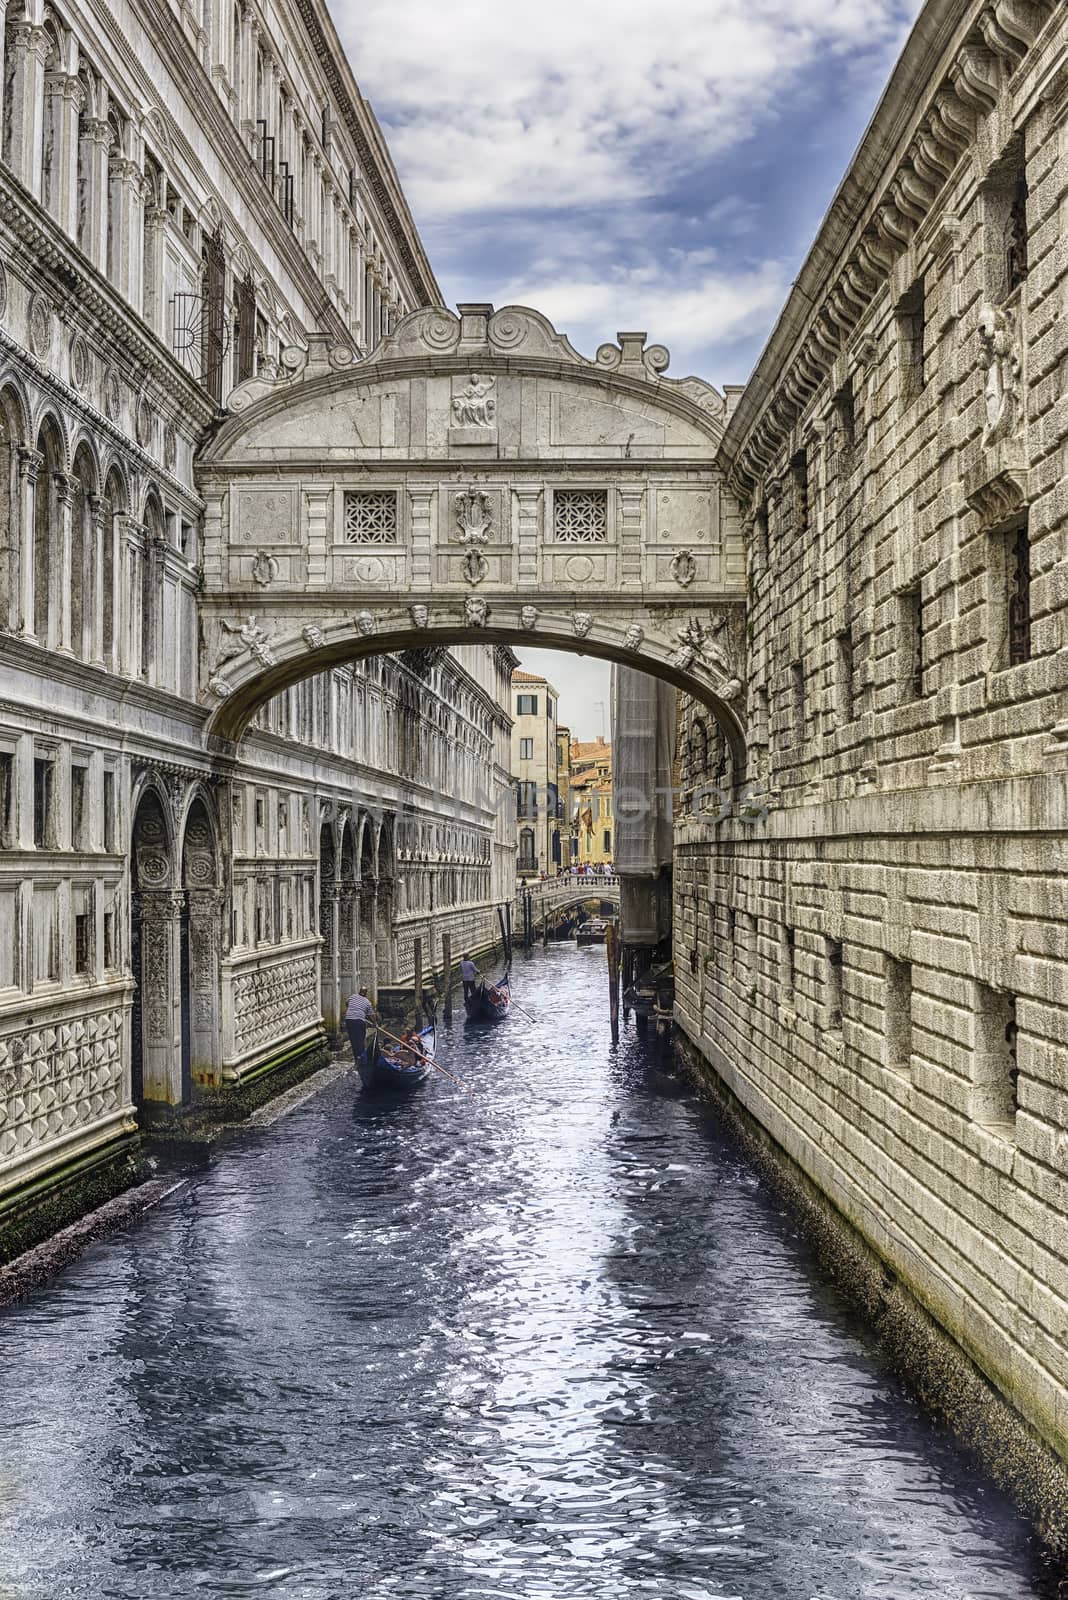 View over the iconic Bridge of Sighs, Venice, Italy by marcorubino